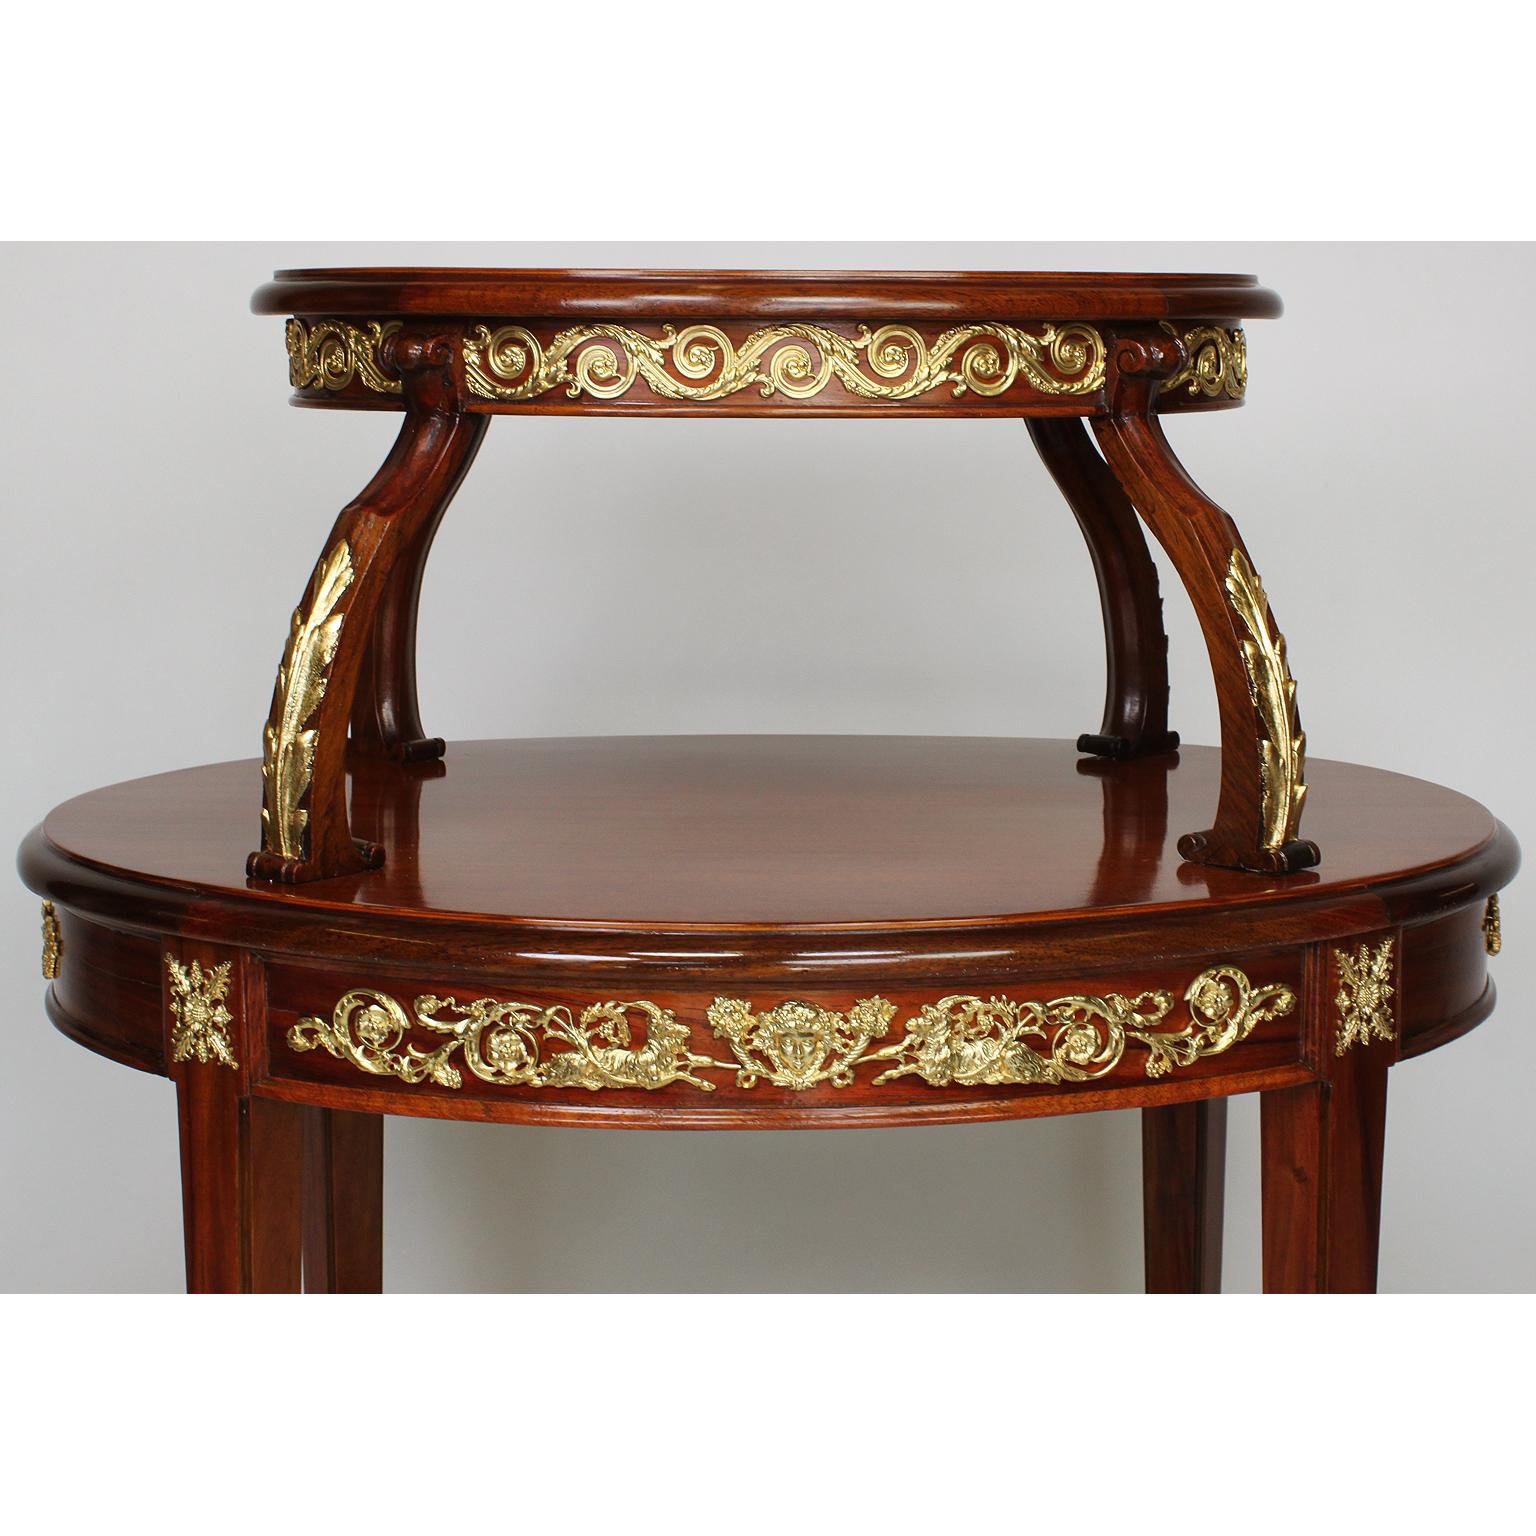 Gilt Louis XVI Style Mahogany and Ormolu Mounted 2-Tier Dessert Table by P. E. Guerin For Sale